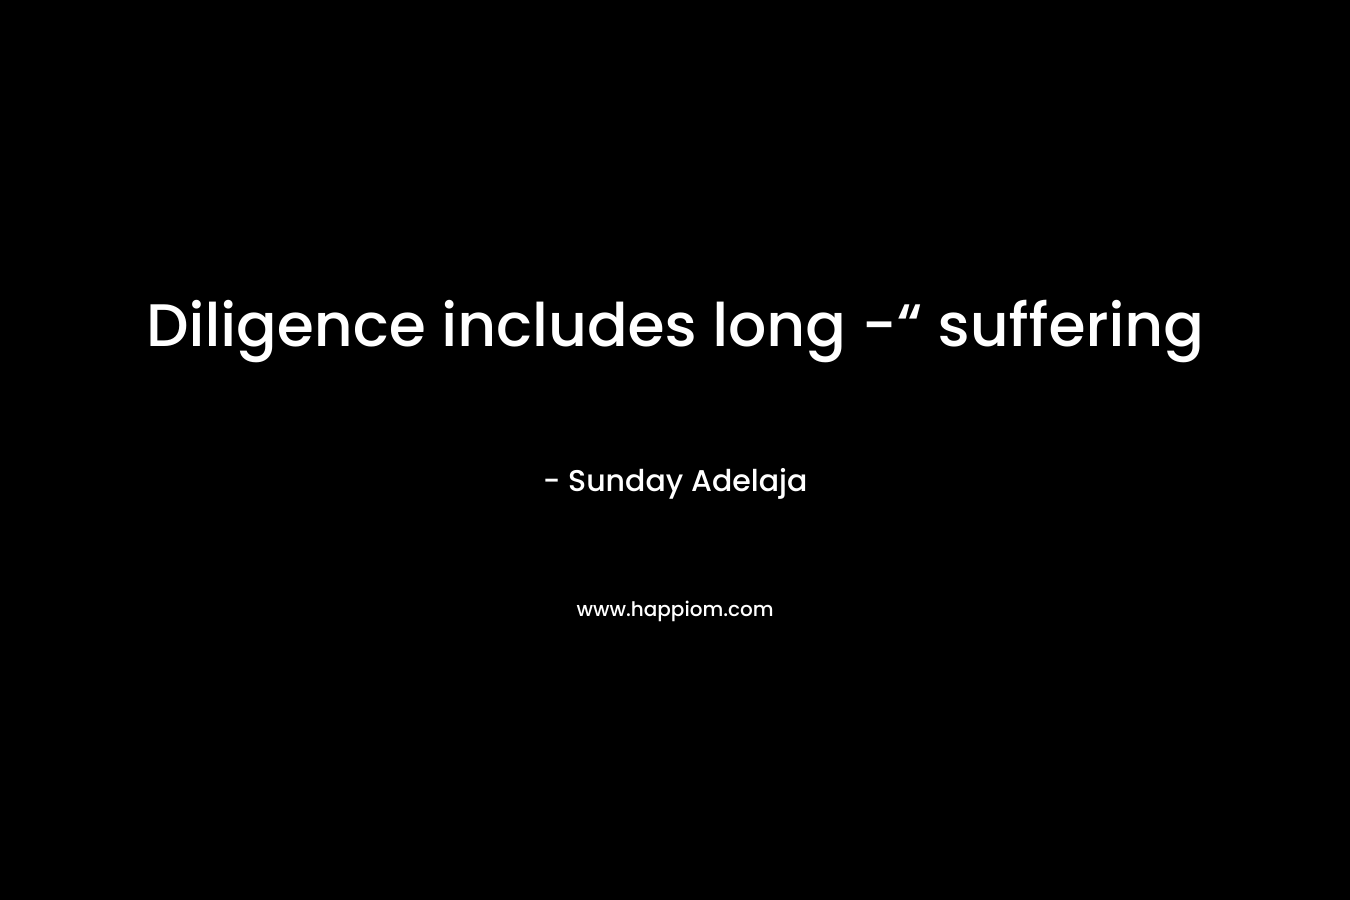 Diligence includes long -“ suffering